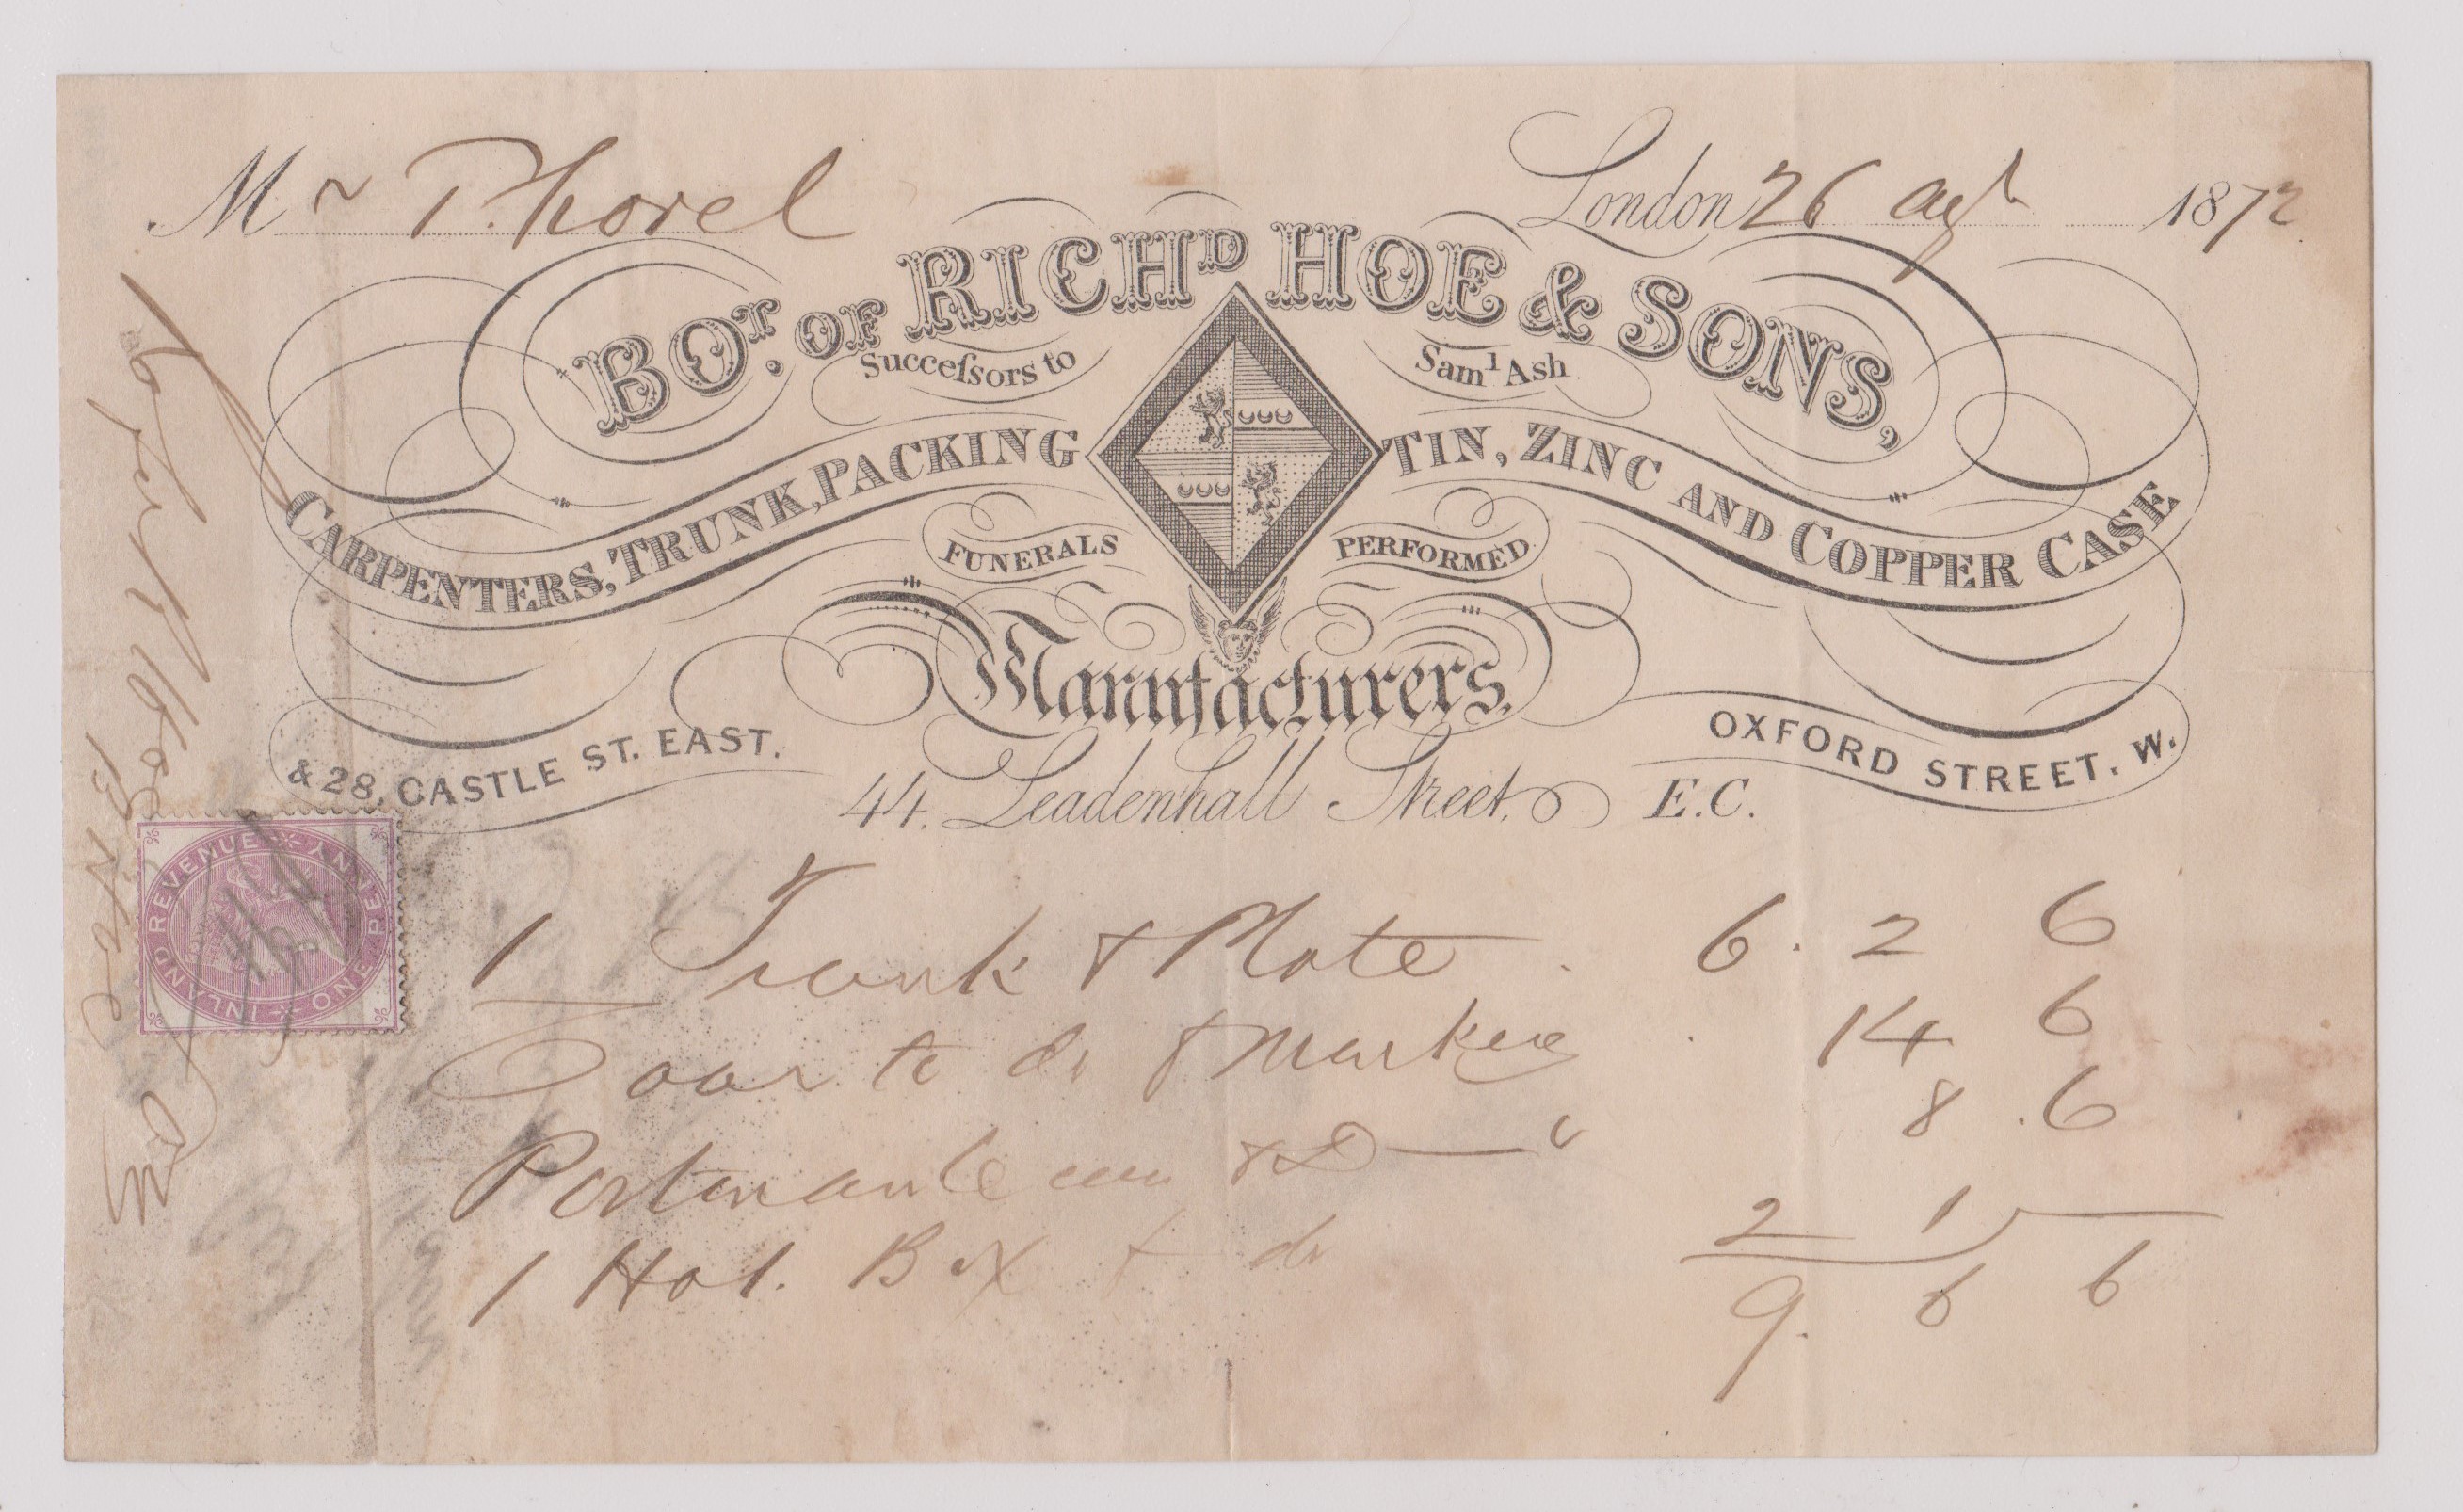 1872 Engraved invoice, Richard Hoe & Sons, Oxford Street, Manufacturers, Carpenters, Trunk, Packing,